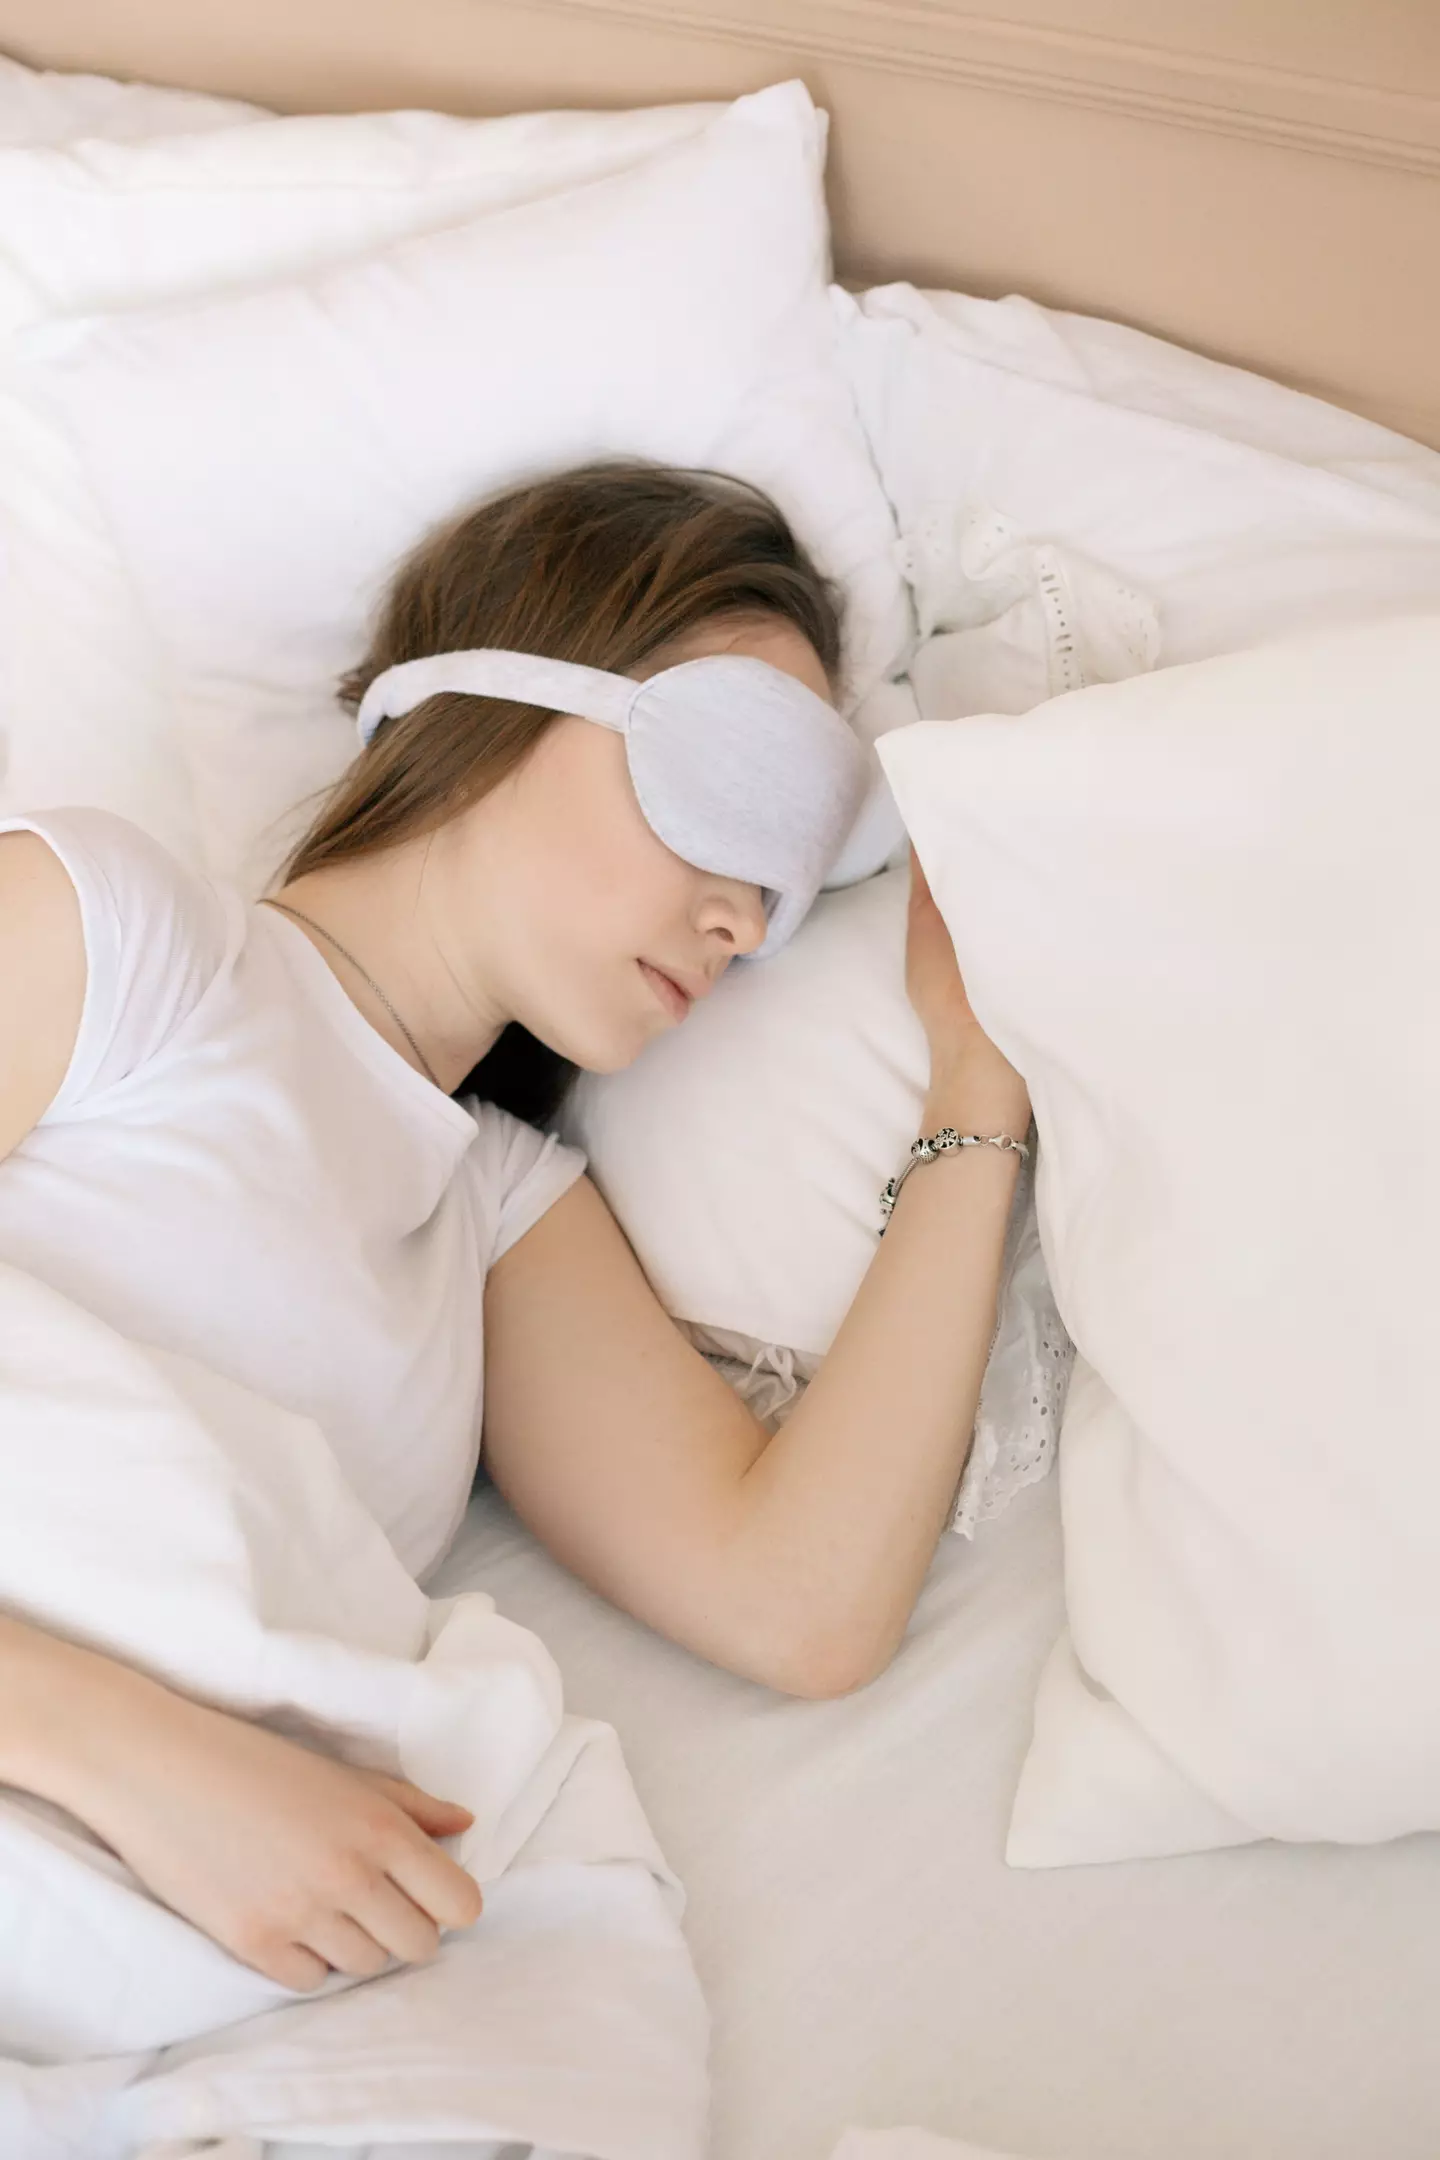 Does your body sometimes jerk when you're falling asleep?